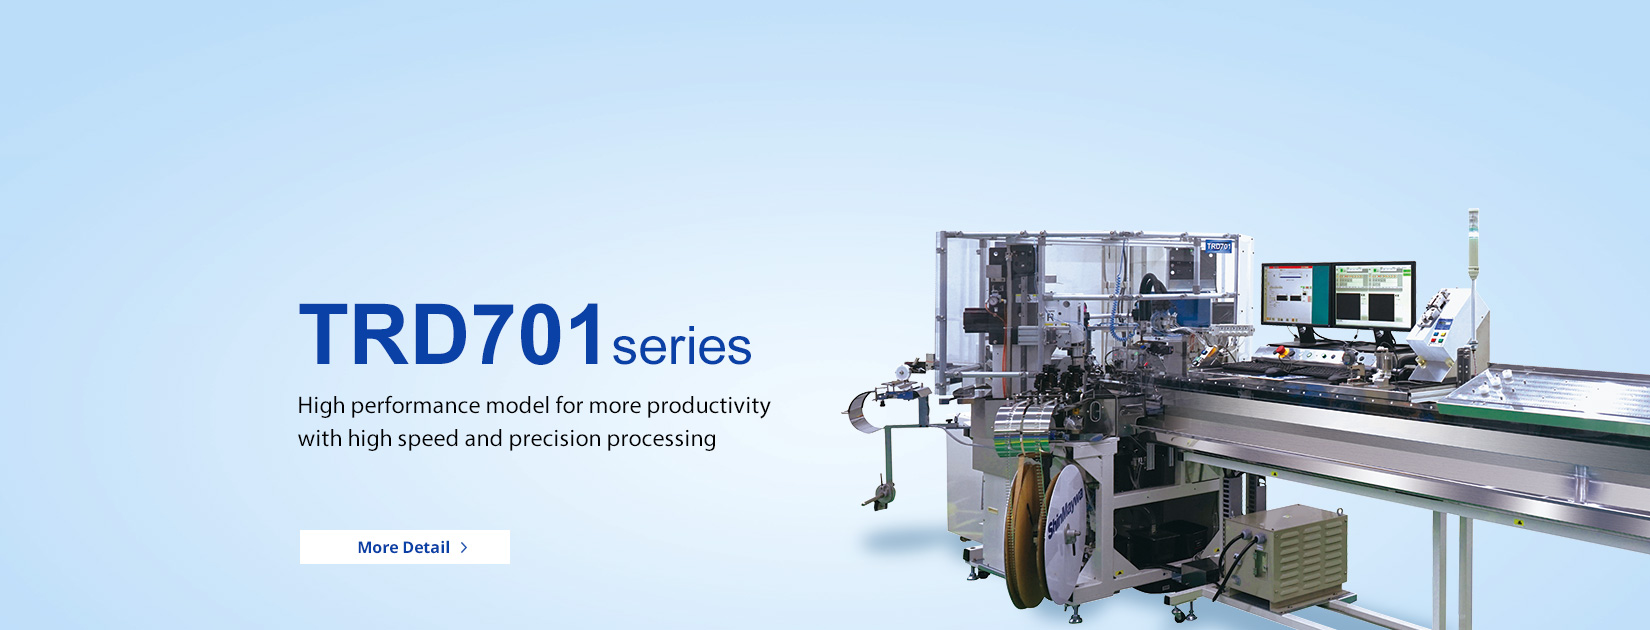 High performance model for more productivity with high speed and precision processing